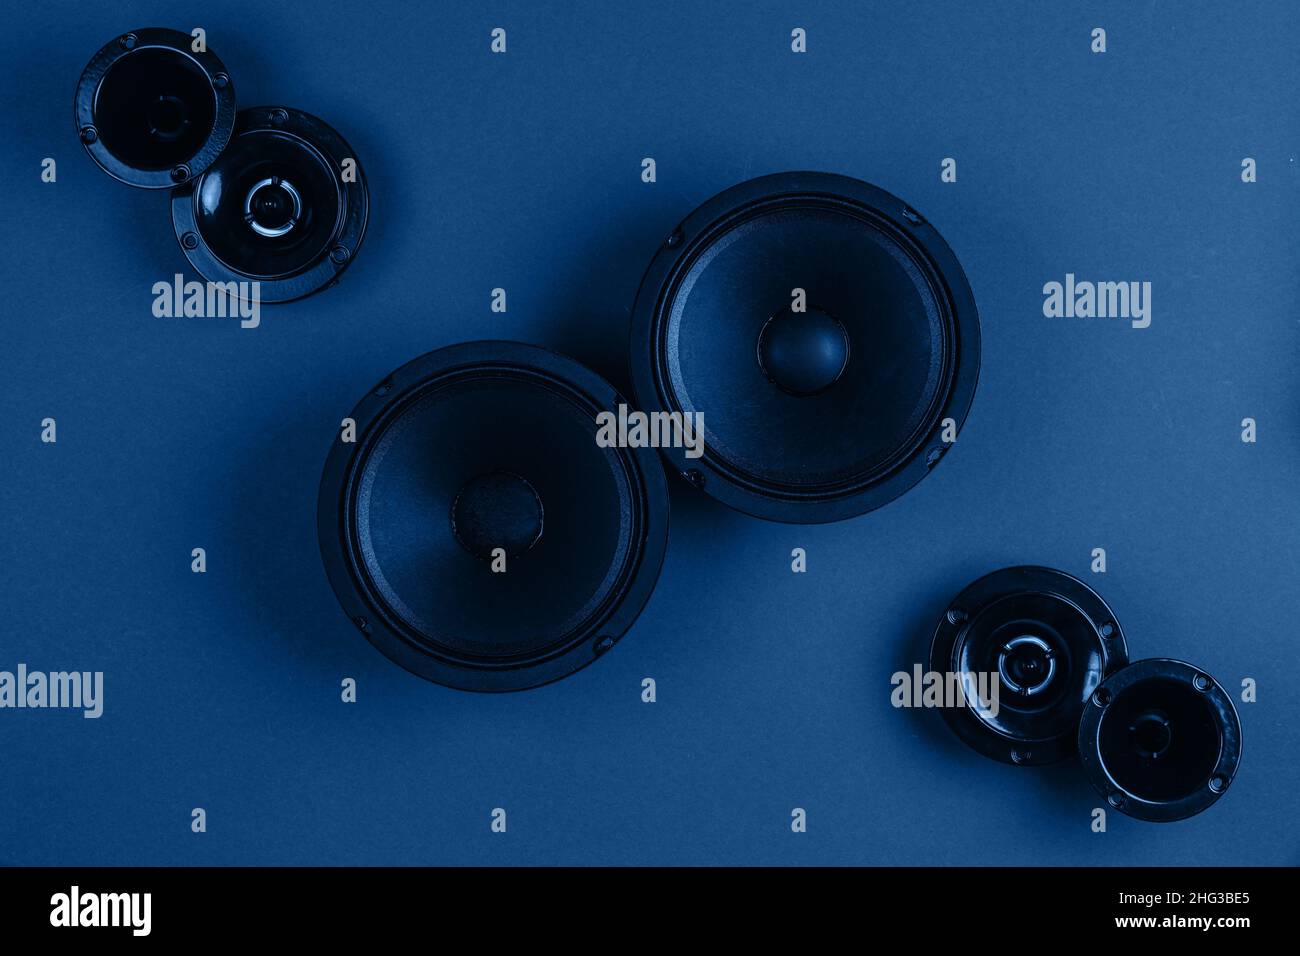 Car audio system. A set of speakers on a blue background.  Stock Photo